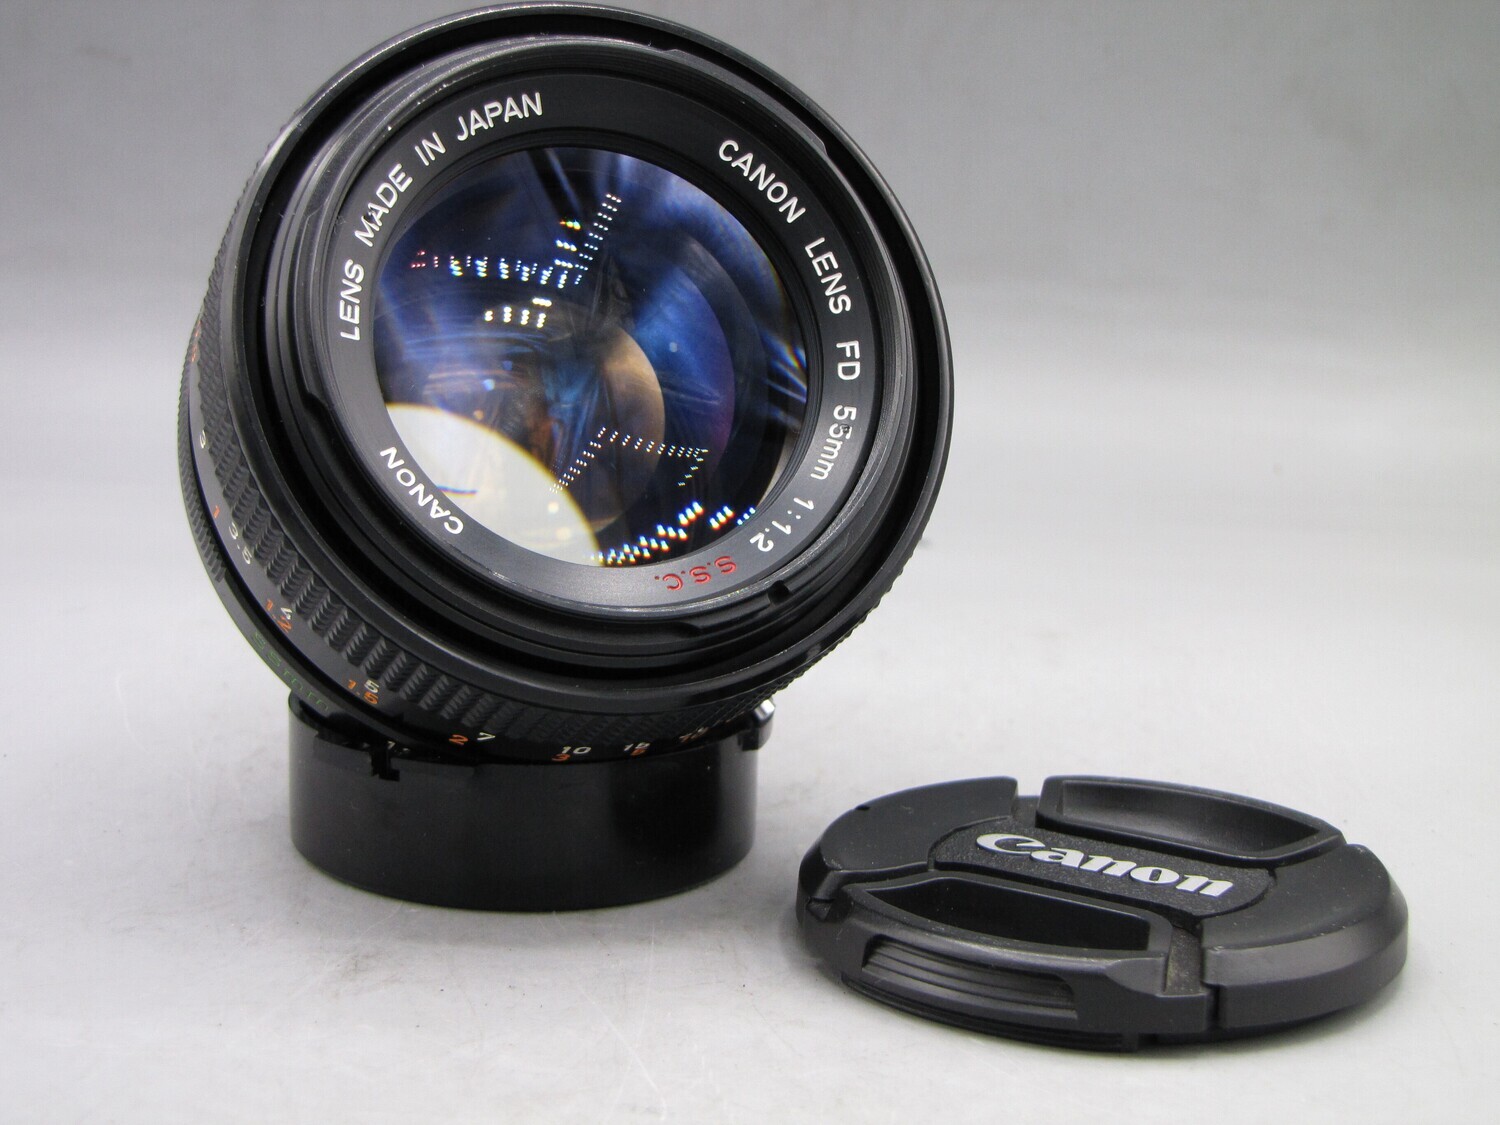 Canon FD 55mm 1:1.2 S.S.C. "O" Lens Serviced & Tested